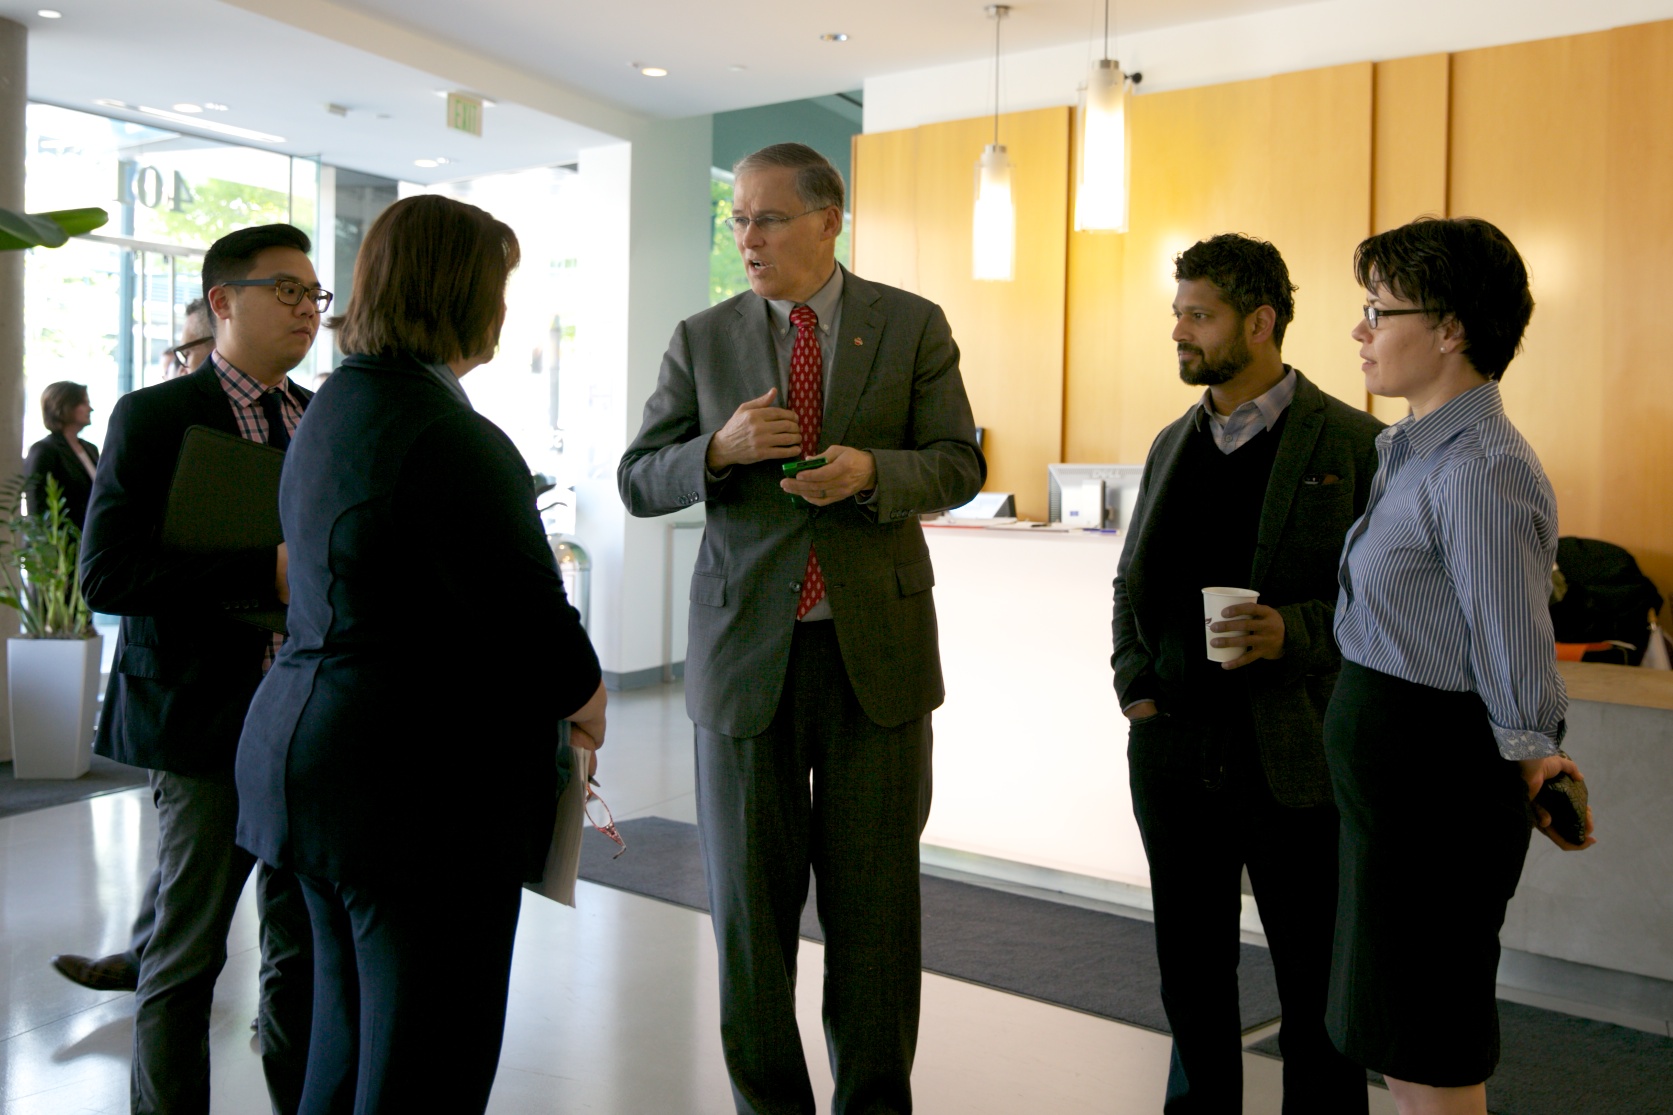 Washington Gov. Jay Inslee, center, chats with two of his staff members, left, and, at right, Dr. Nitin Baliga and Dr. Dana Riley Black, both of Institute for Systems Biology, Institute for Systems Biology/March 16, 2015